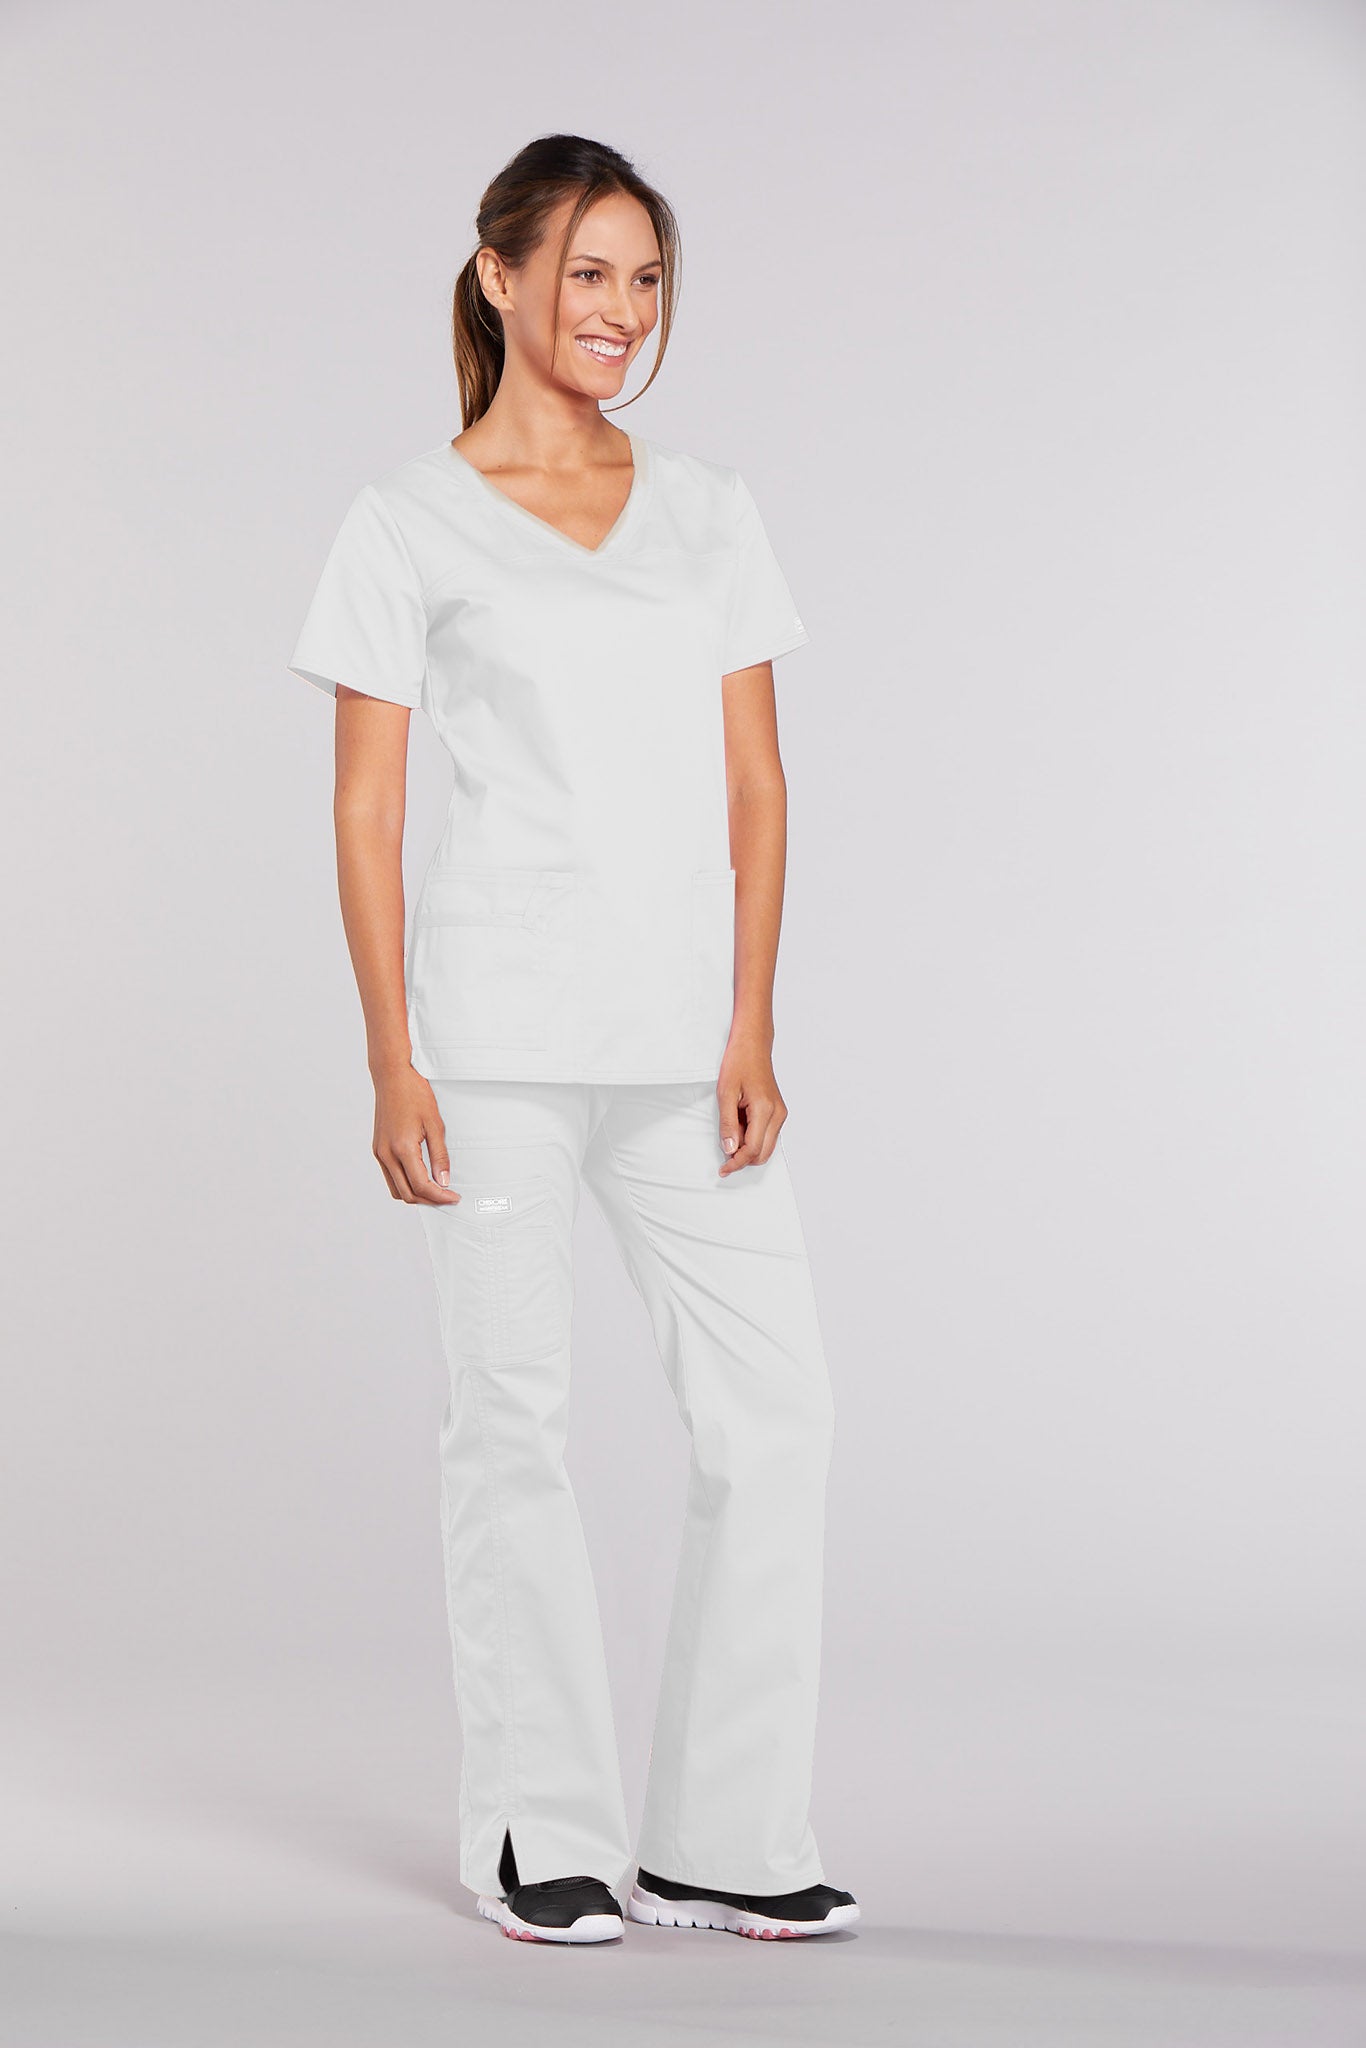 White - Cherokee Workwear Core Stretch V-Neck Top